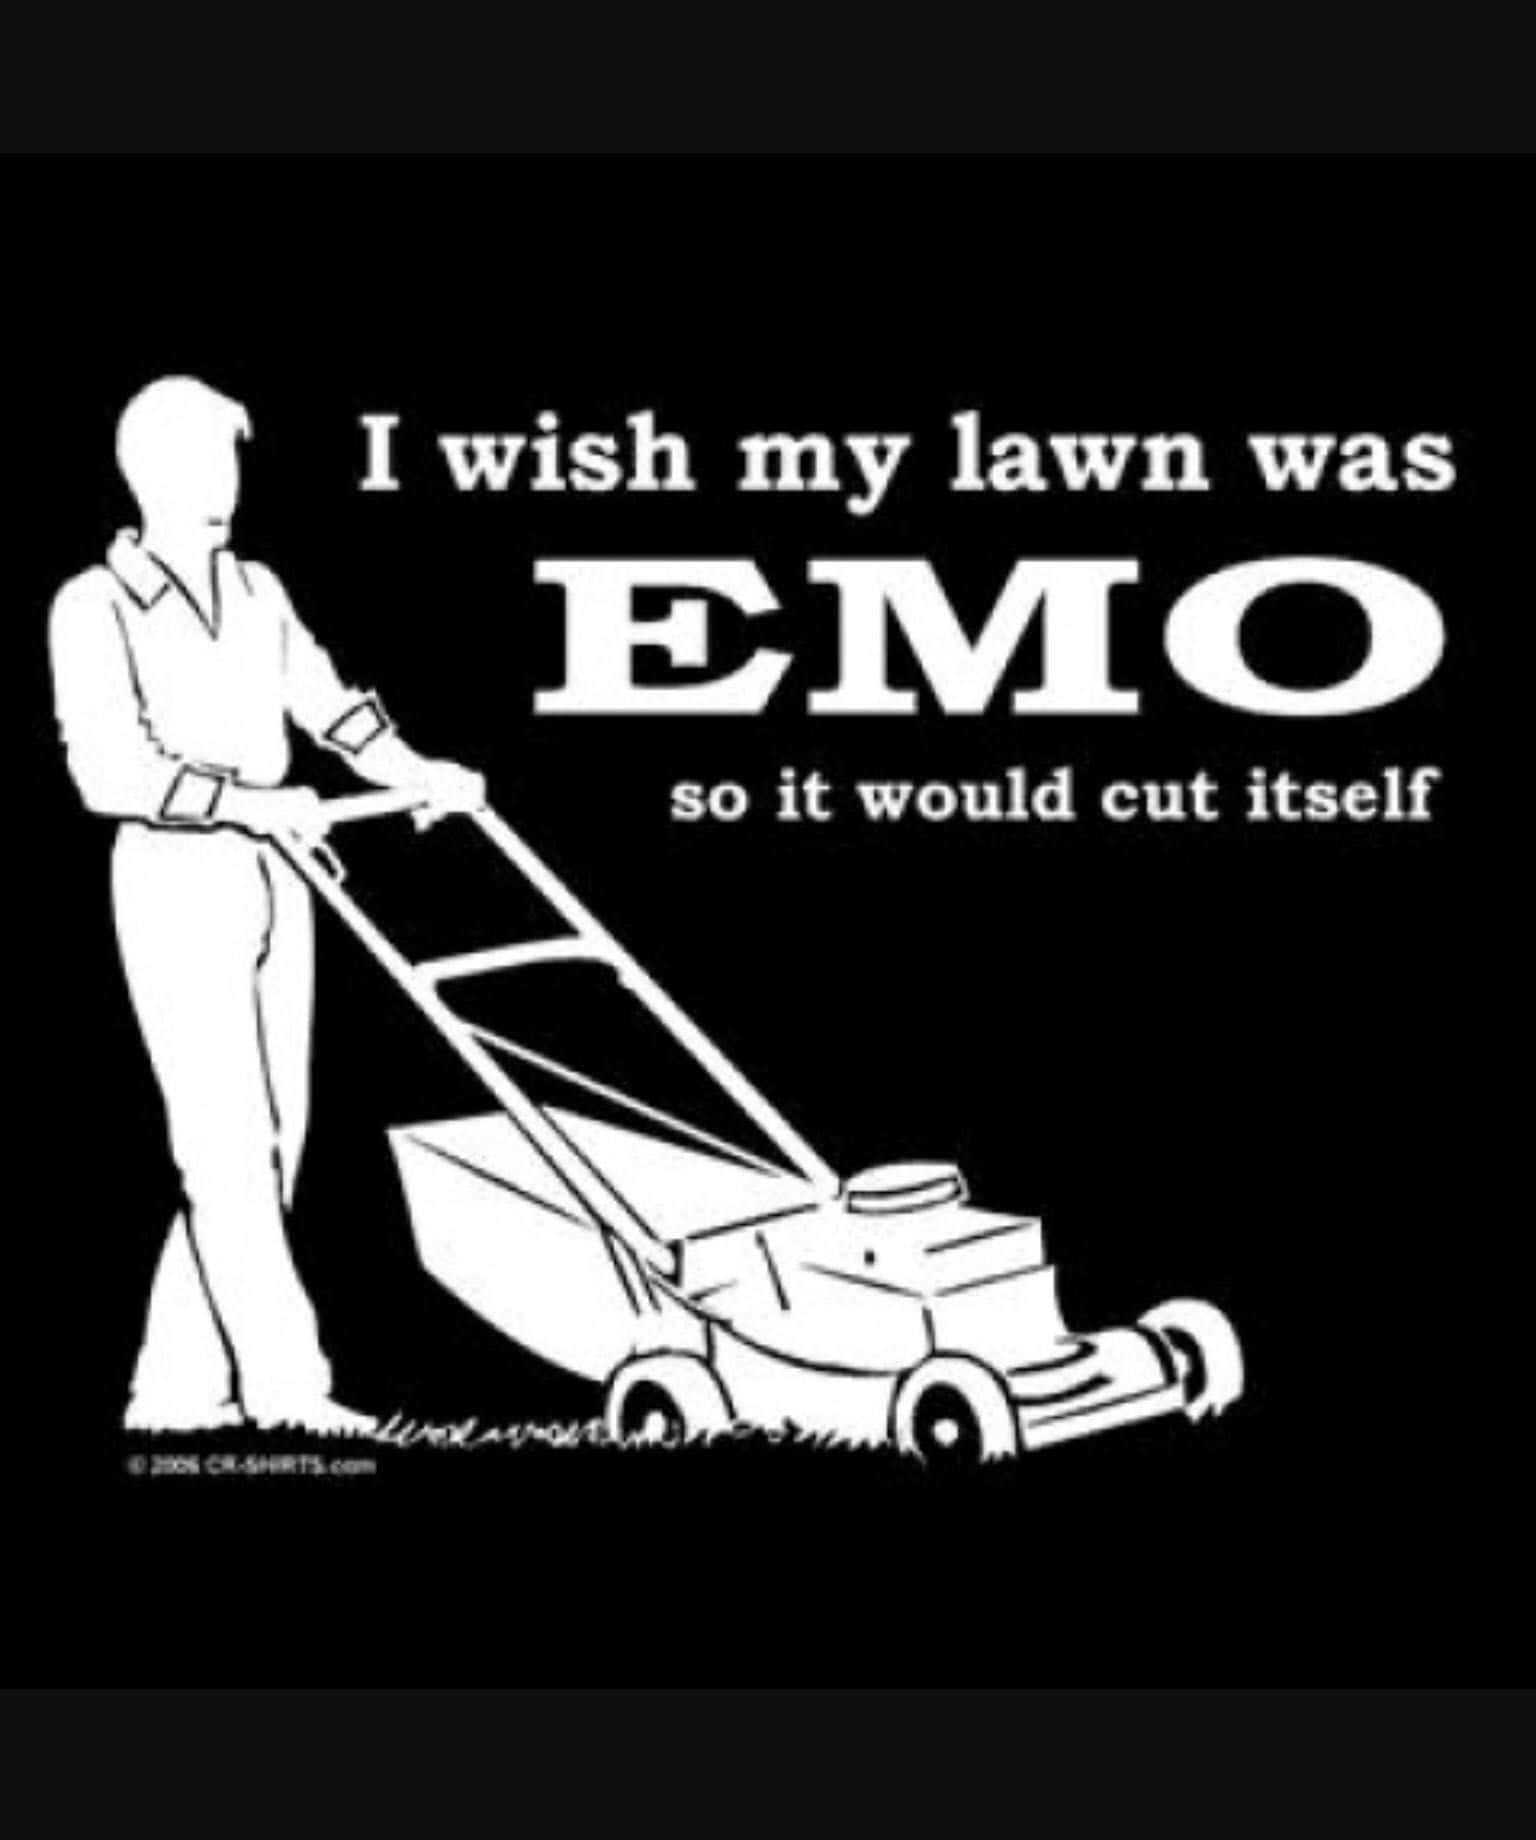 A Man With A Lawn Mower That Says I Wish My Lawn Was Emo So It Would Cut Itself